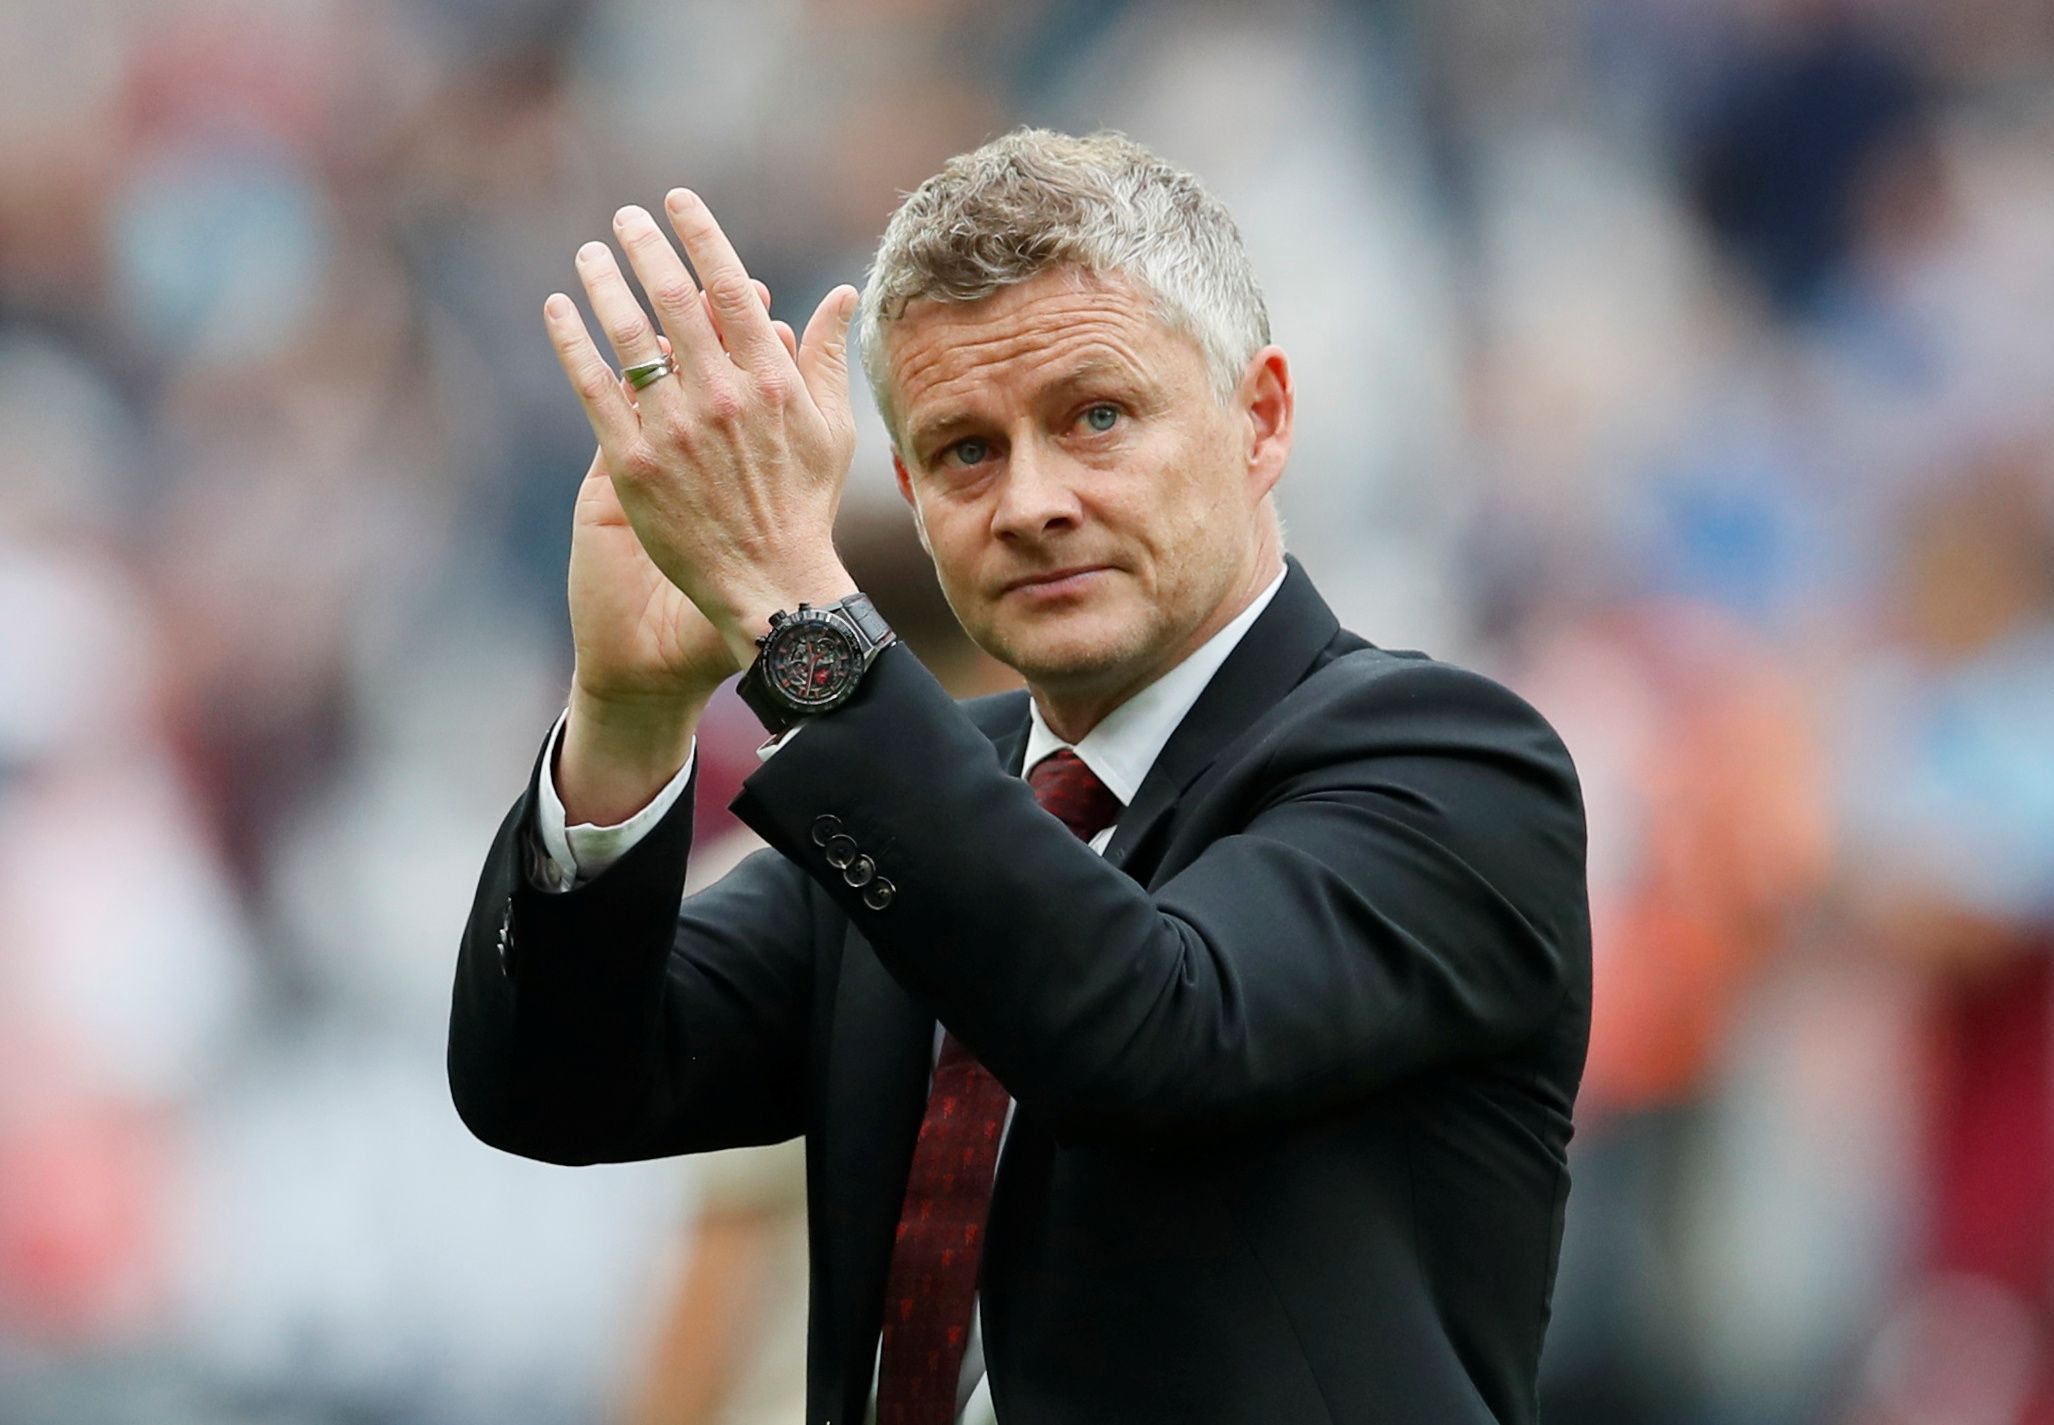 Soccer Football - Premier League - West Ham United v Manchester United - London Stadium, London, Britain - September 22, 2019  Manchester United manager Ole Gunnar Solskjaer applauds the fans after the match   REUTERS/David Klein  EDITORIAL USE ONLY. No use with unauthorized audio, video, data, fixture lists, club/league logos or 